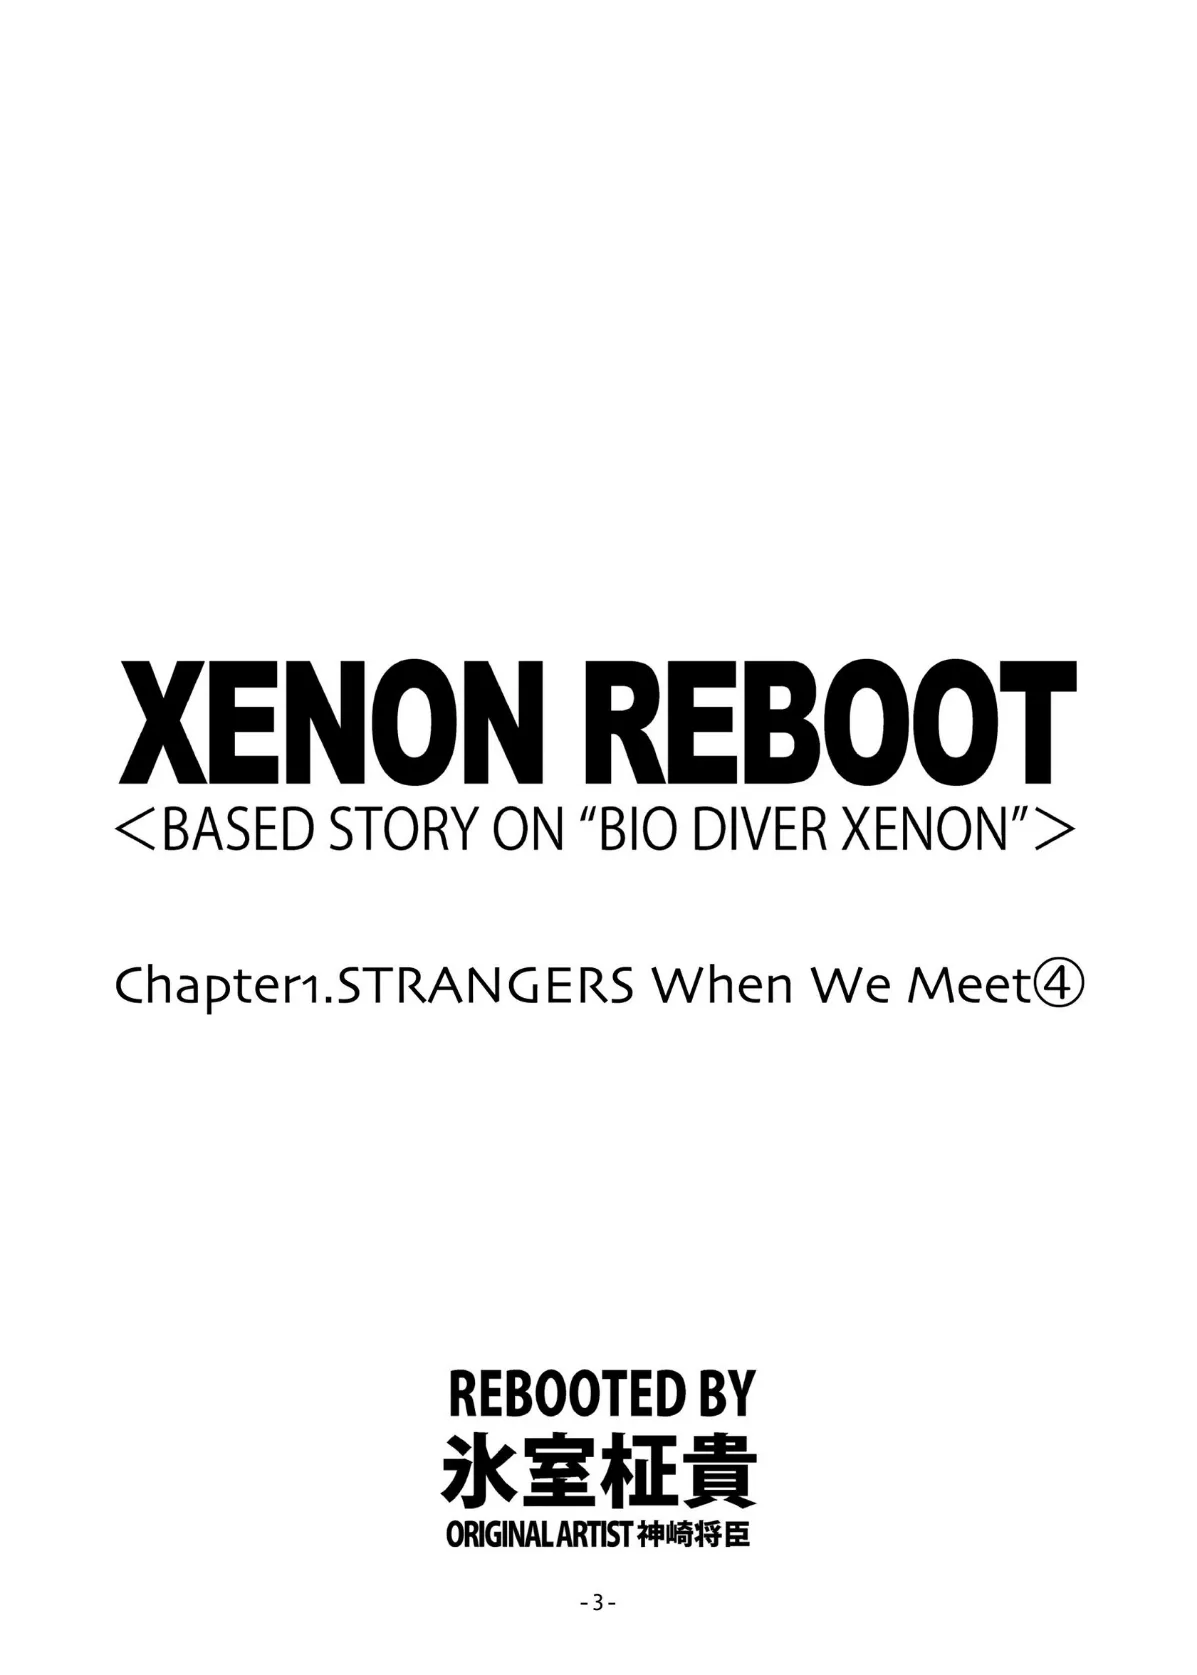 XENON REBOOT＜BASED STORY ON ’BIO DIVER XENON’＞【分冊版】 Chapter1 STRANGERS When We Meet（4） 3ページ